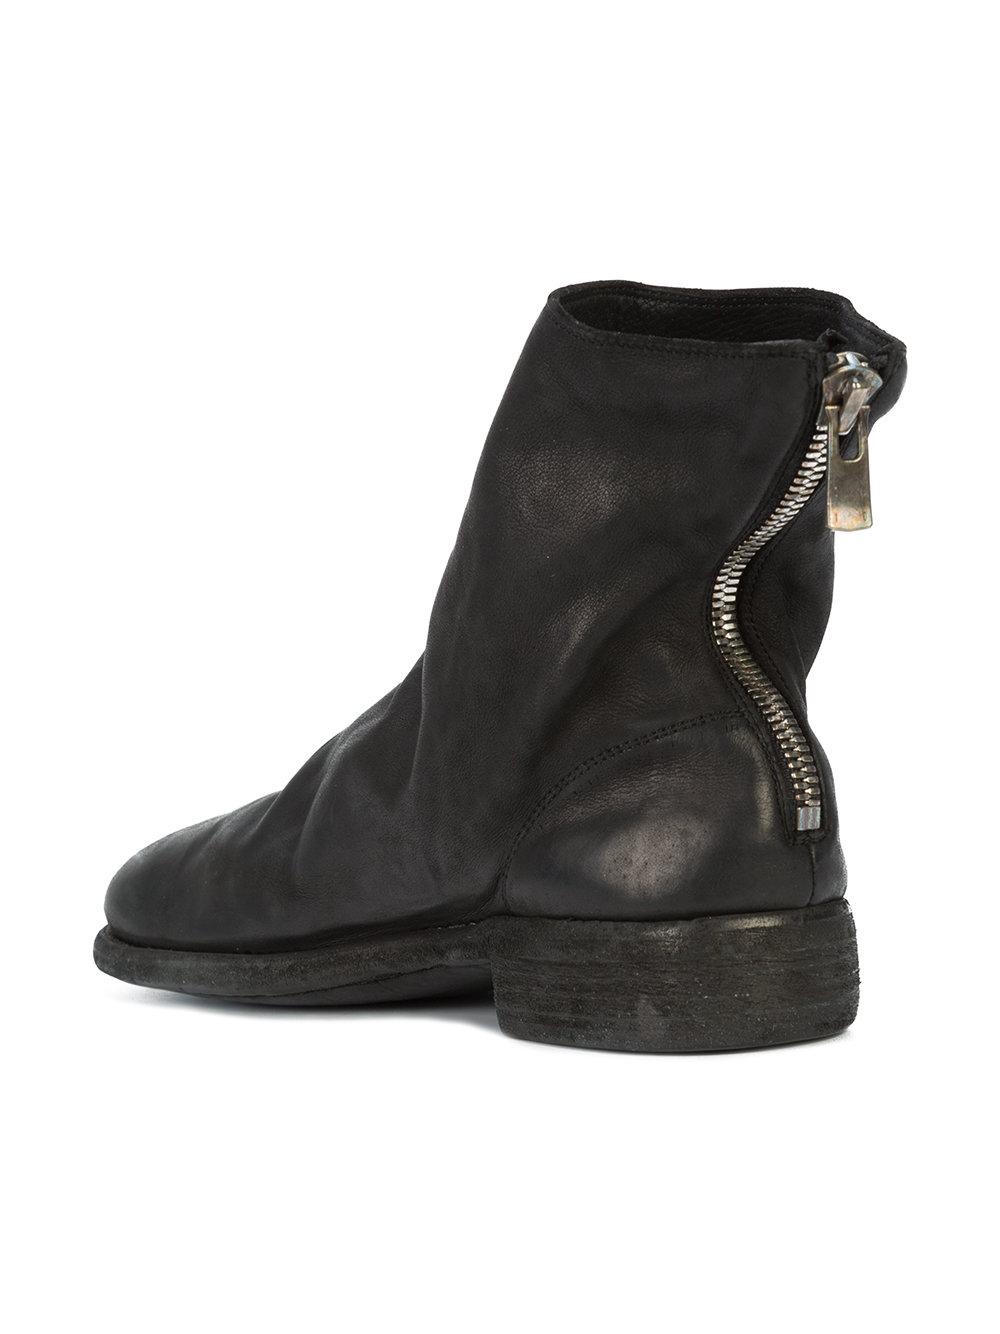 Lyst - Guidi Slouchy Ankle Boots in Black for Men